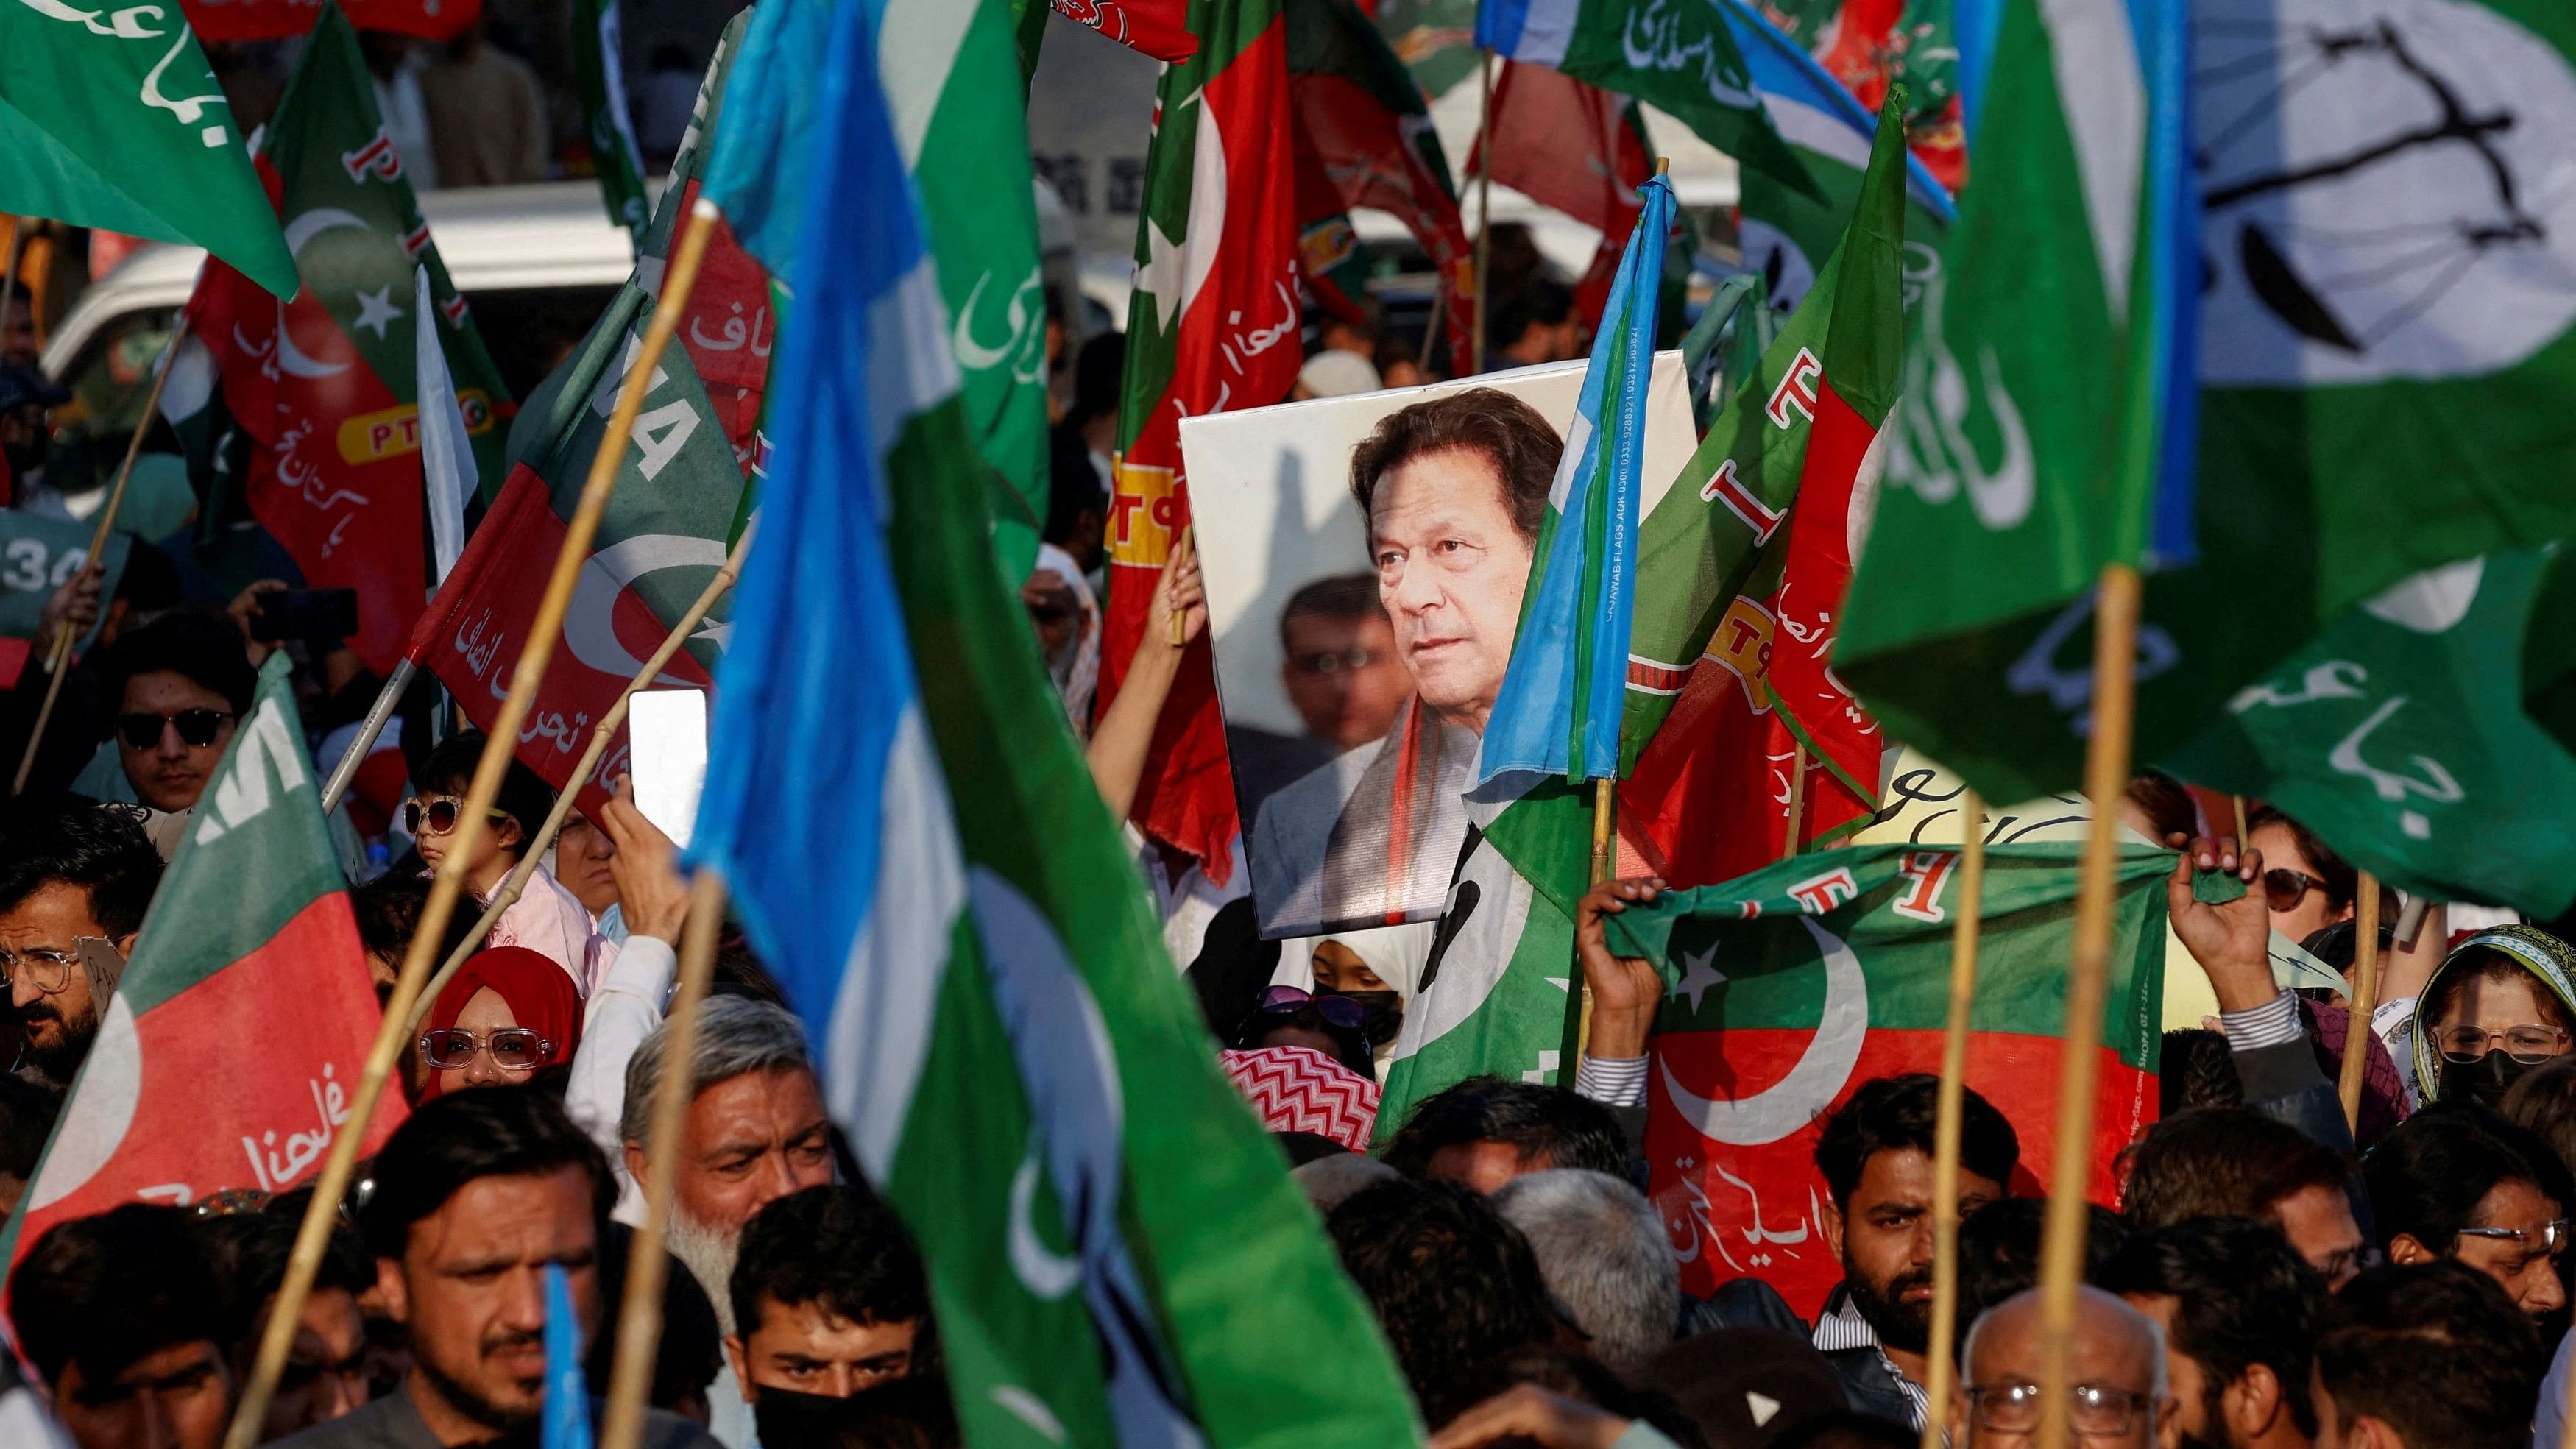 <div class="paragraphs"><p>A portrait of the former Prime Minister Imran Khan is seen amid flags of Pakistan Tehreek-e-Insaf (PTI).</p></div>